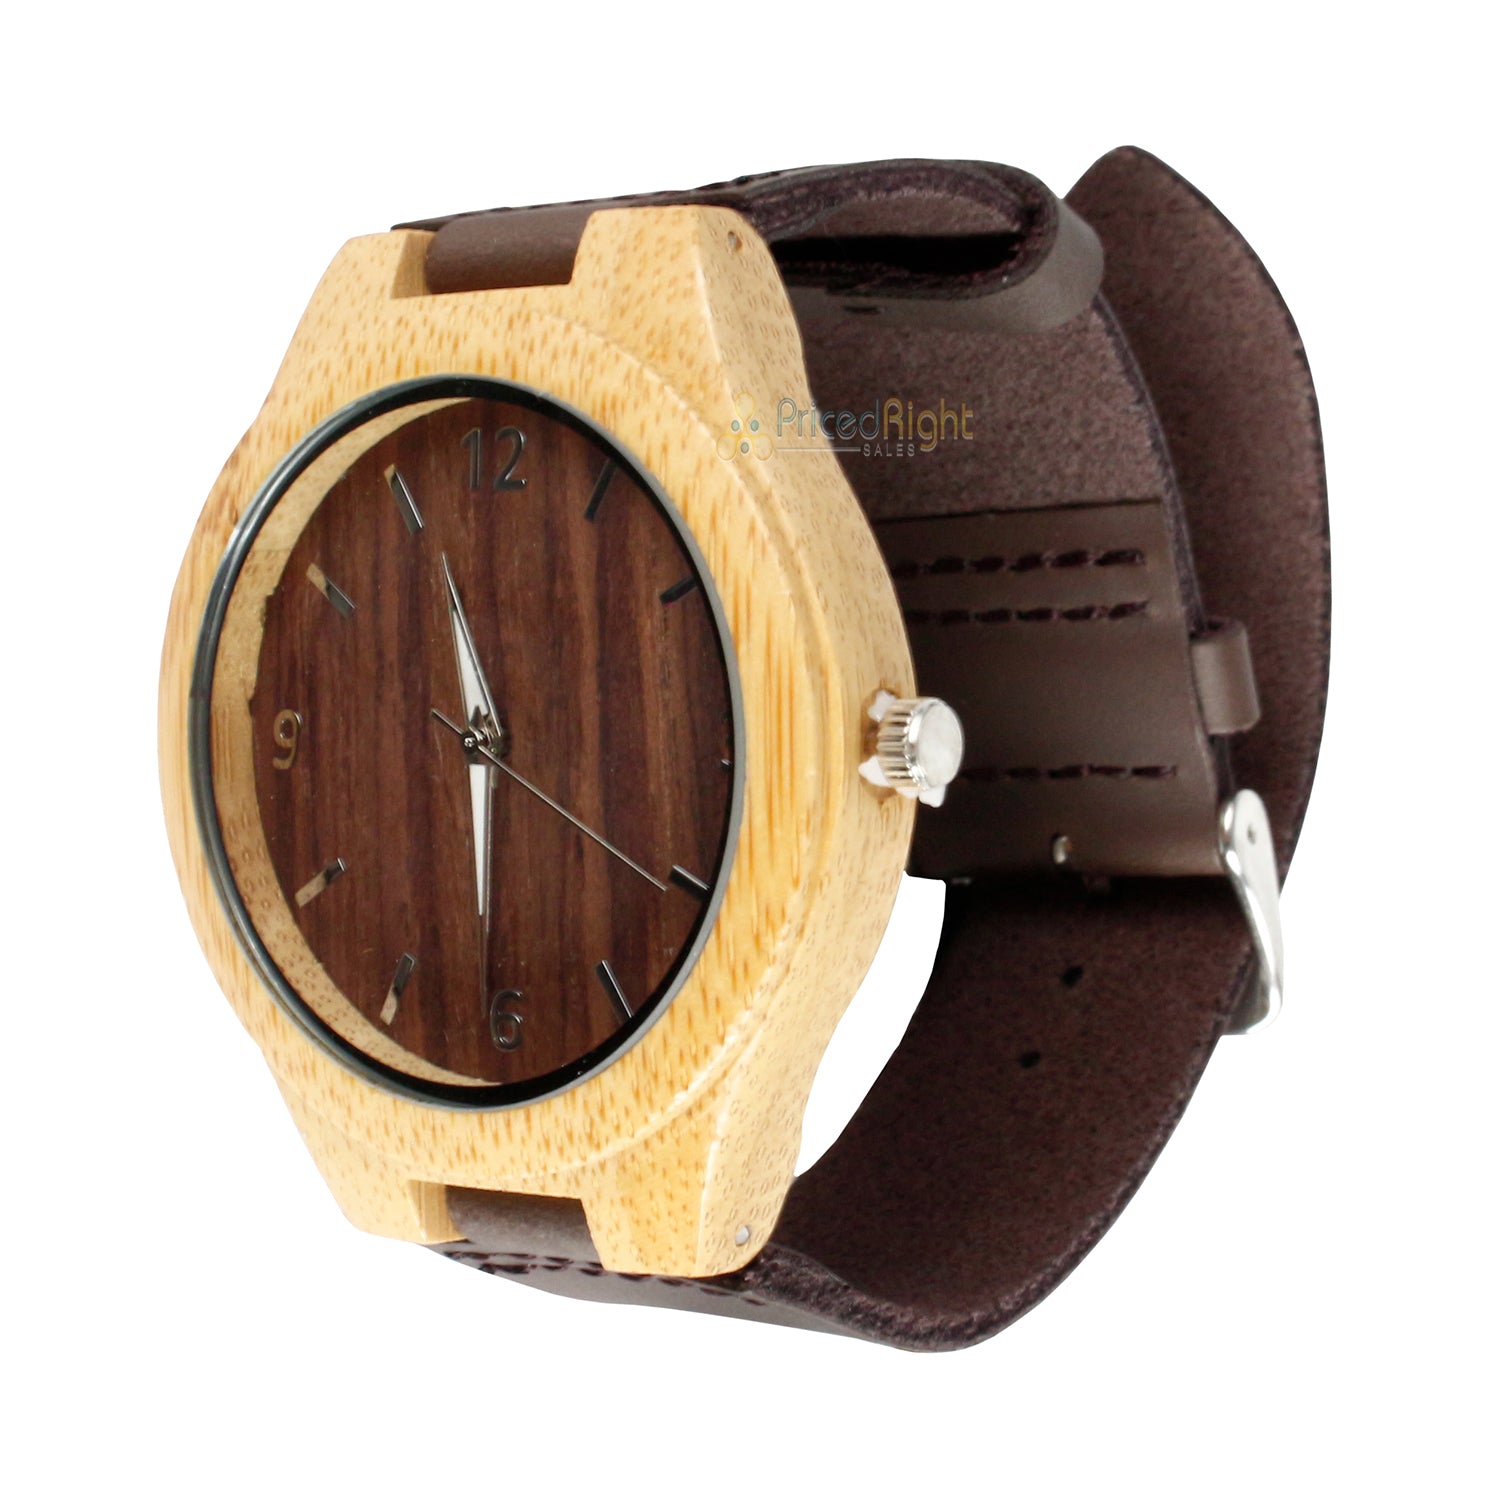 Gucci Bamboo YA132409 Bangle Watch Quartz Silver Dial Ladies《S》 for  Rs.33,481 for sale from a Seller on Chrono24